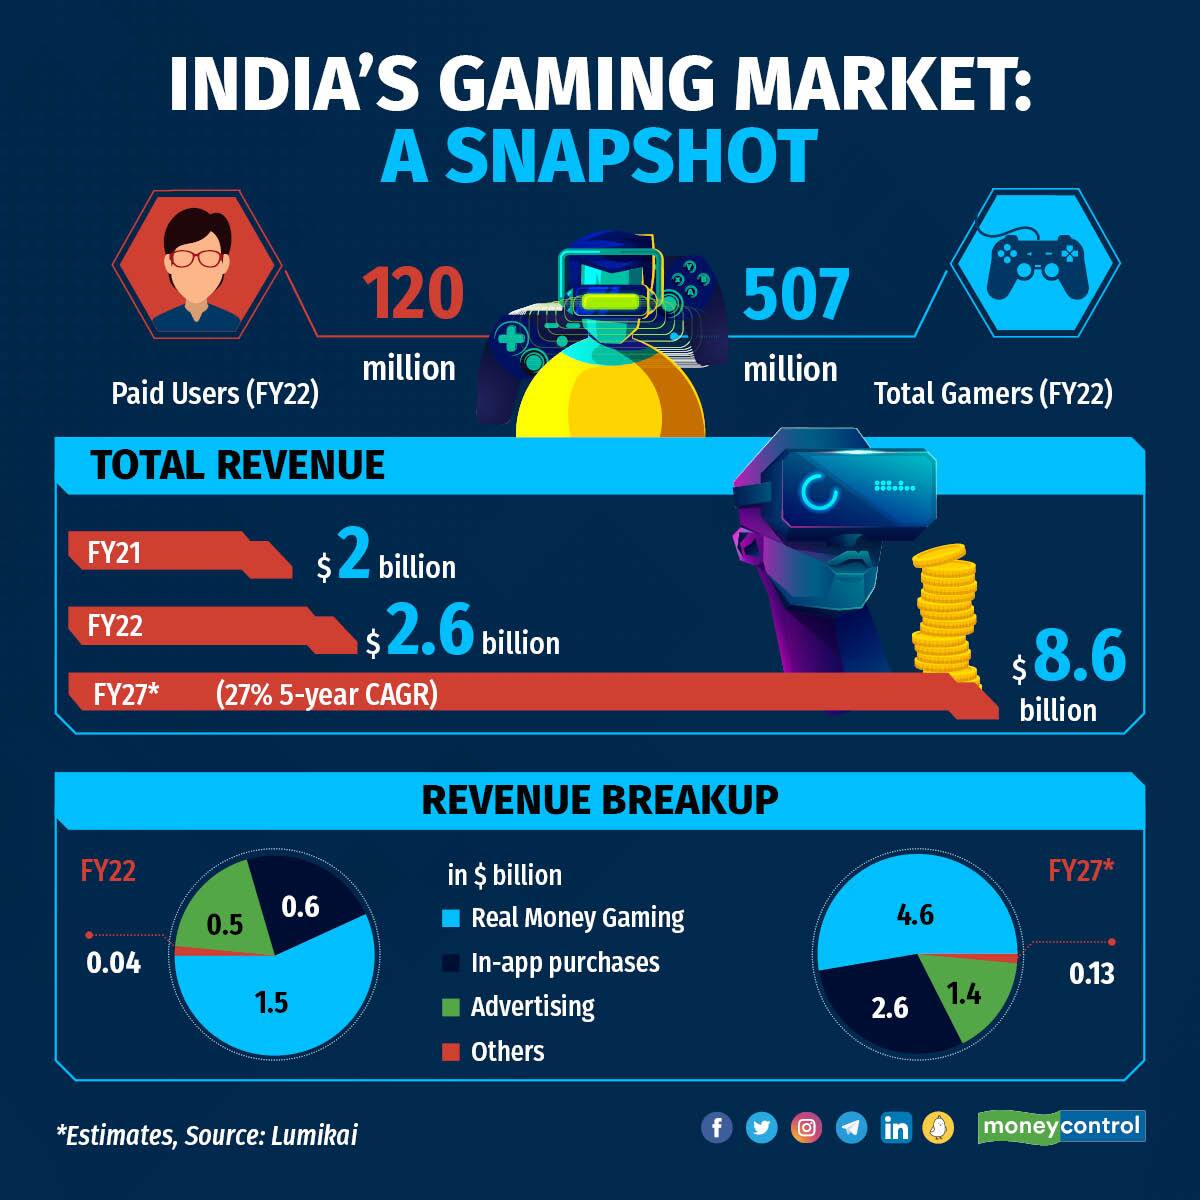 Investing in India's Online Gaming Industry: Key Market Growth Drivers